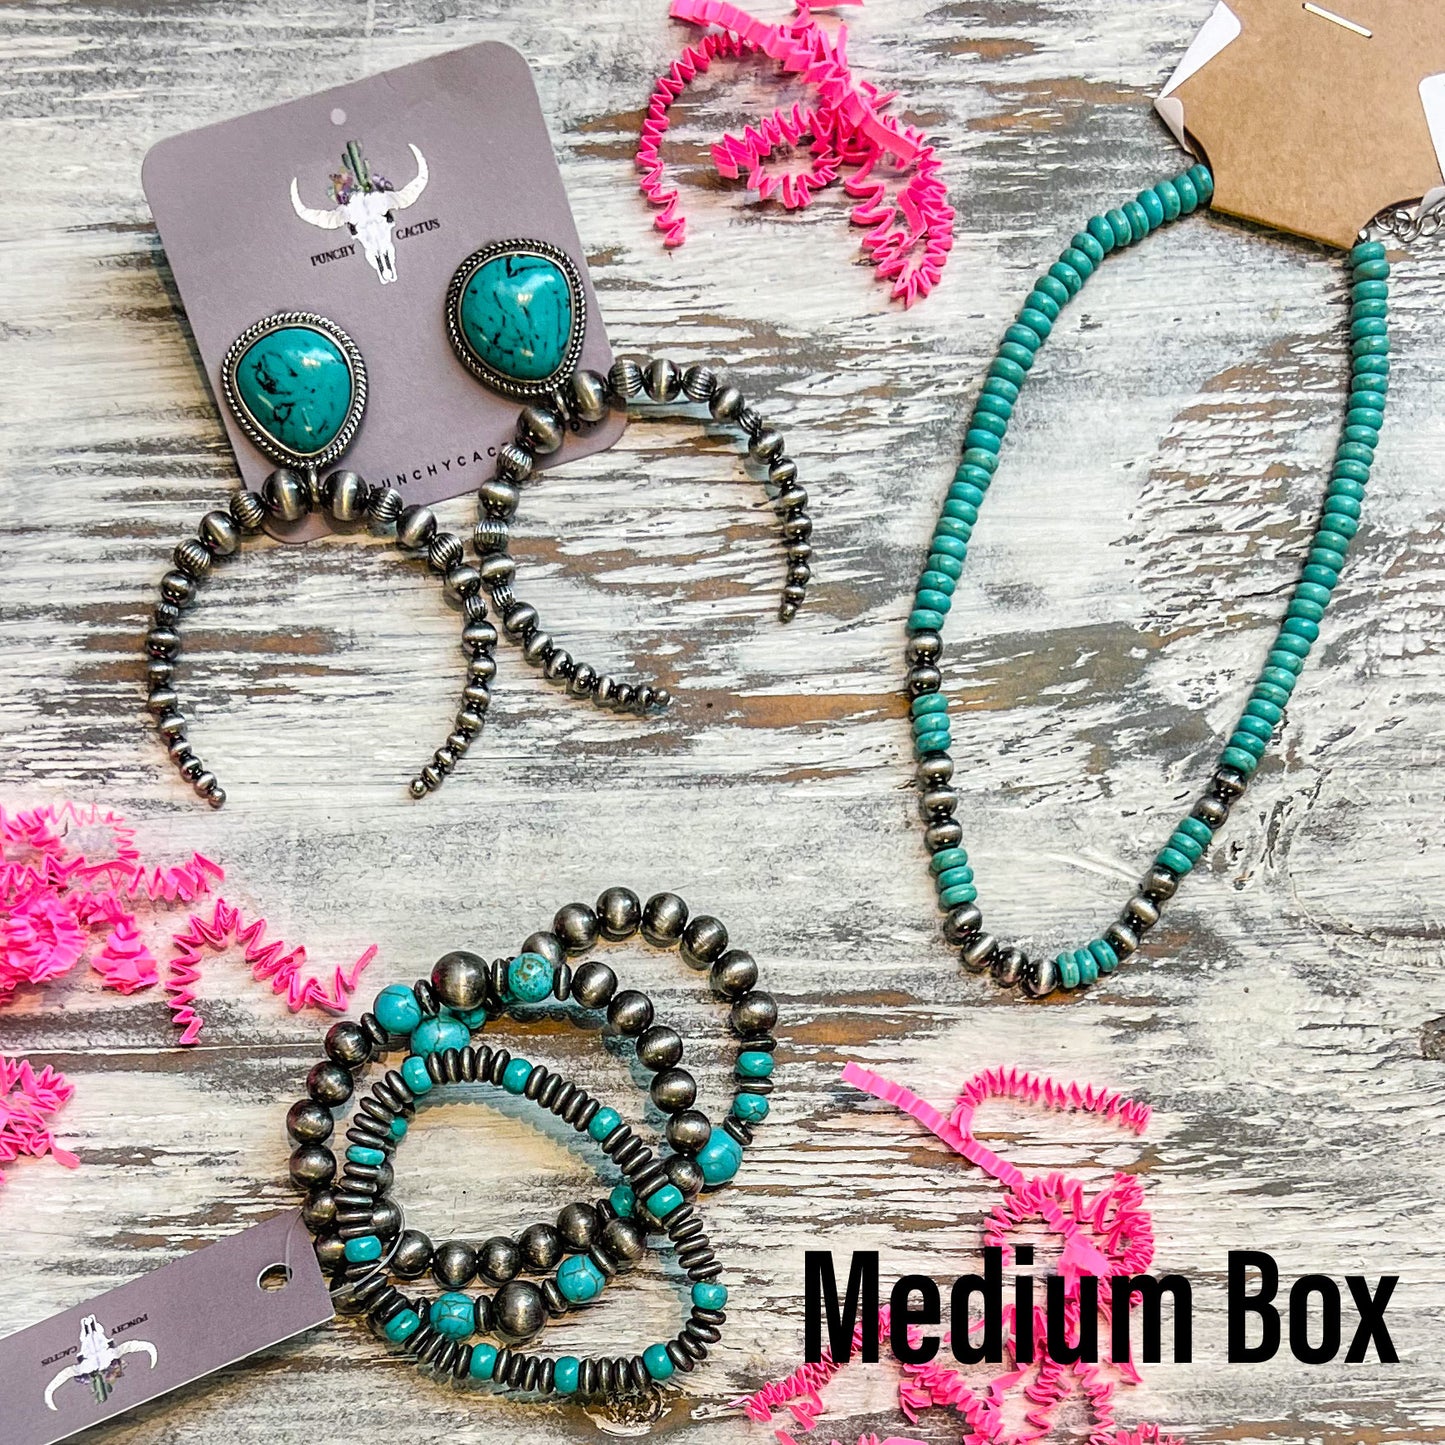 Western Jewelry Subscription Box